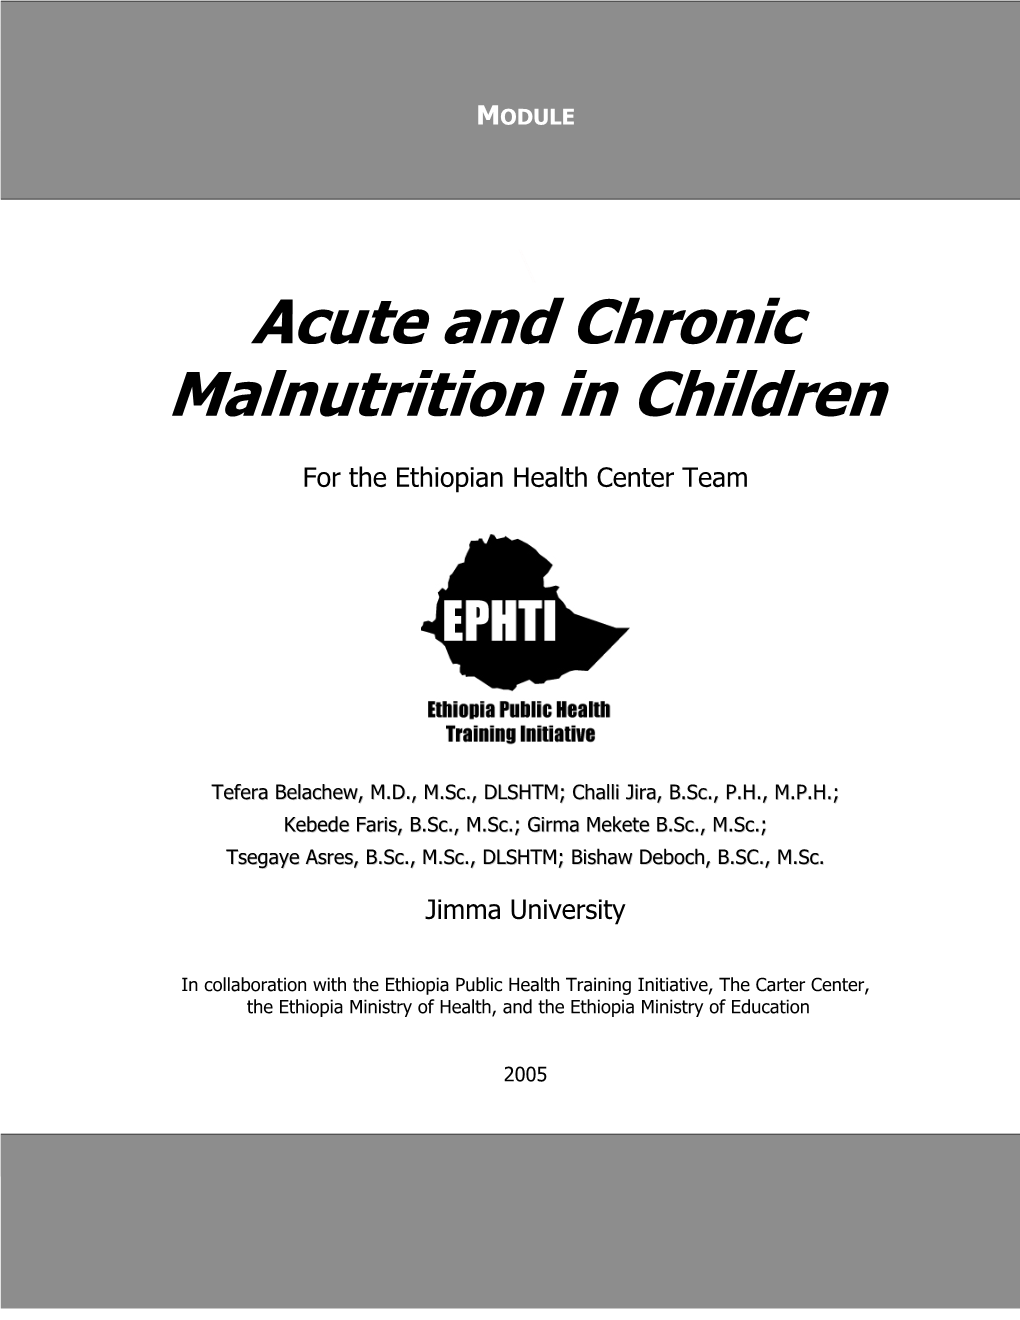 Acute and Chronic Malnutrition in Children